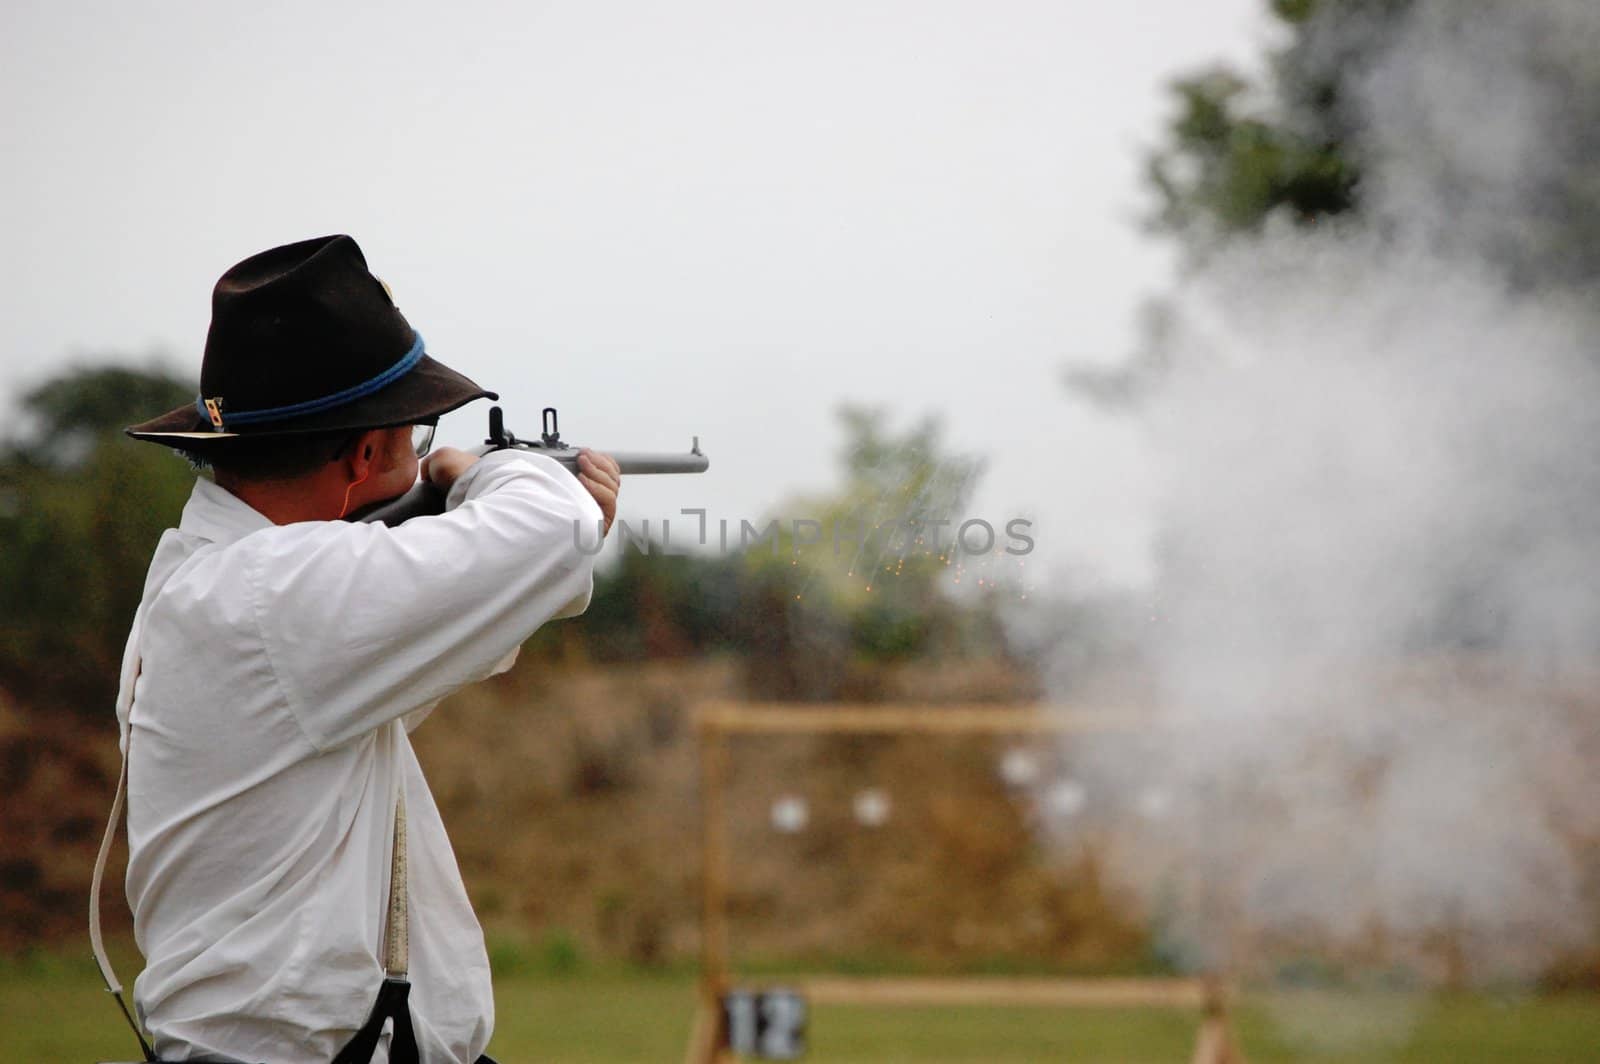 Man shoots carbine sparks fly by RefocusPhoto